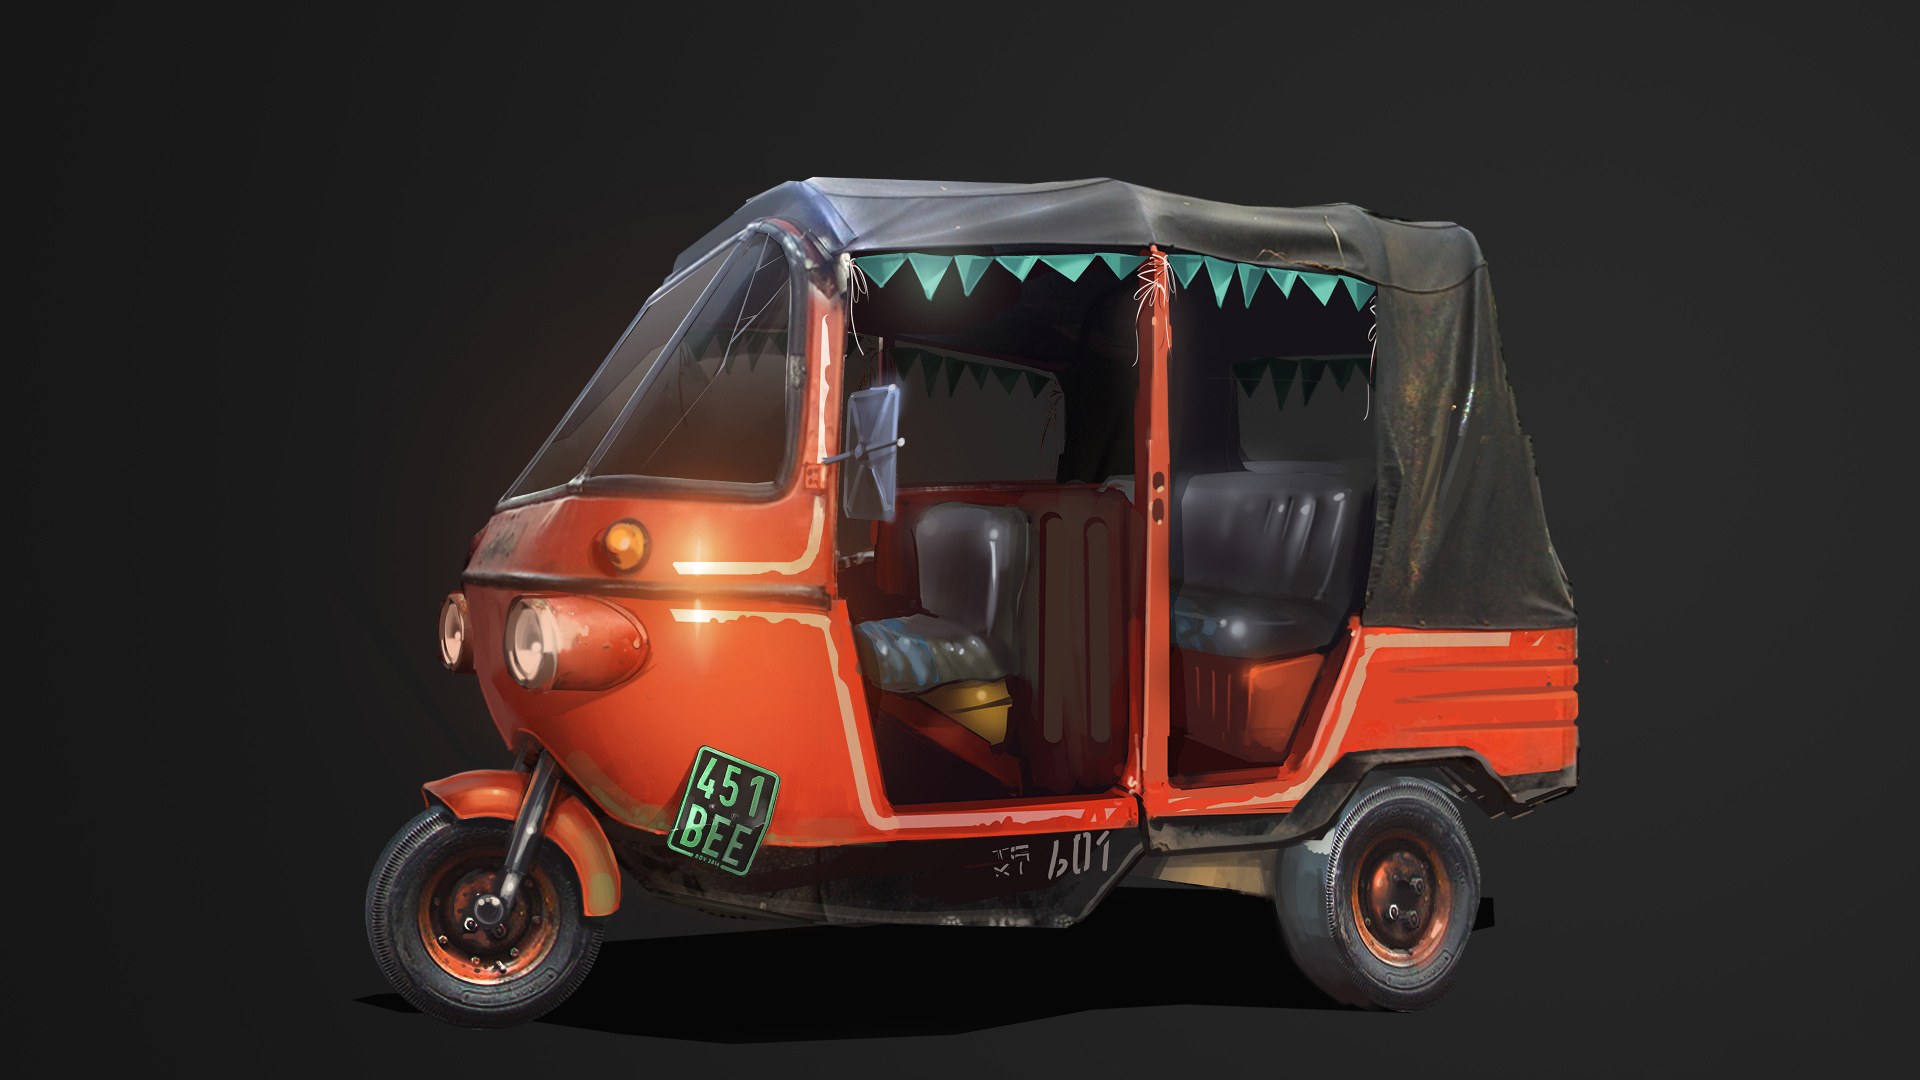 Red and Black Auto Rickshaw. Wallpaper in 1920x1080 Resolution